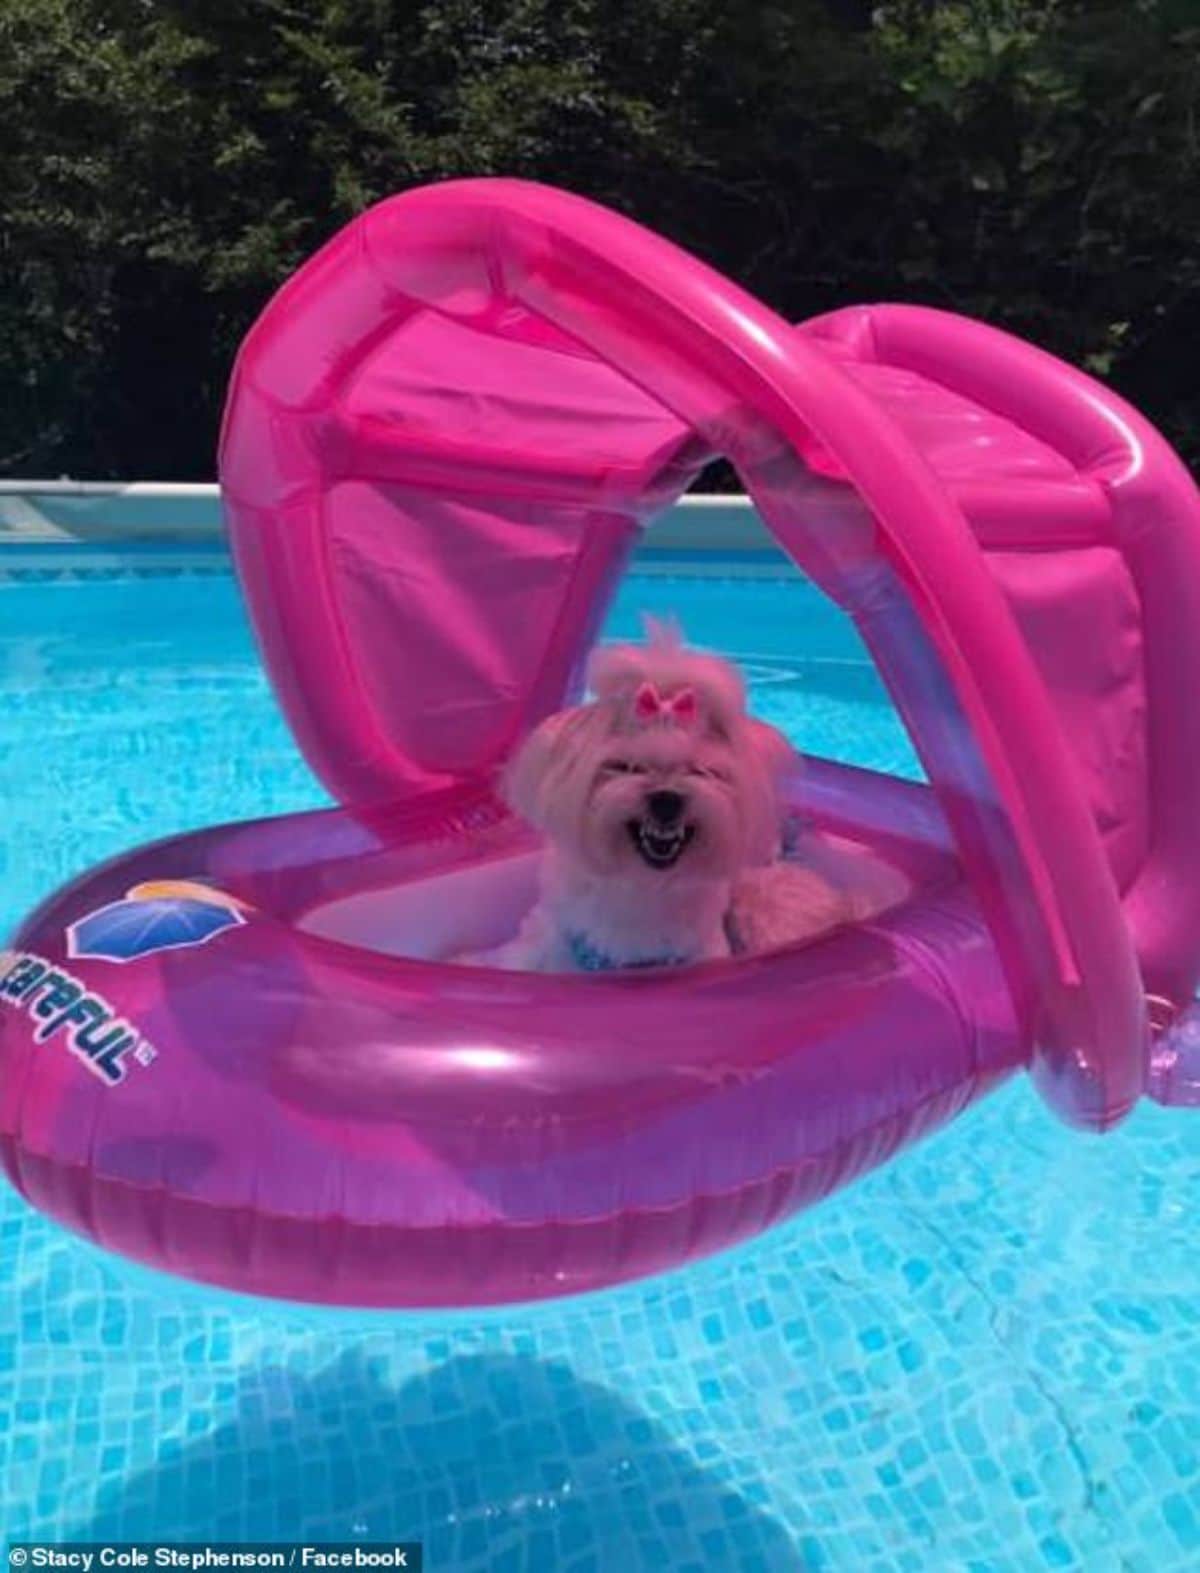 growling small white fluffy dog sitting in a large pink pool float in a swimming pool